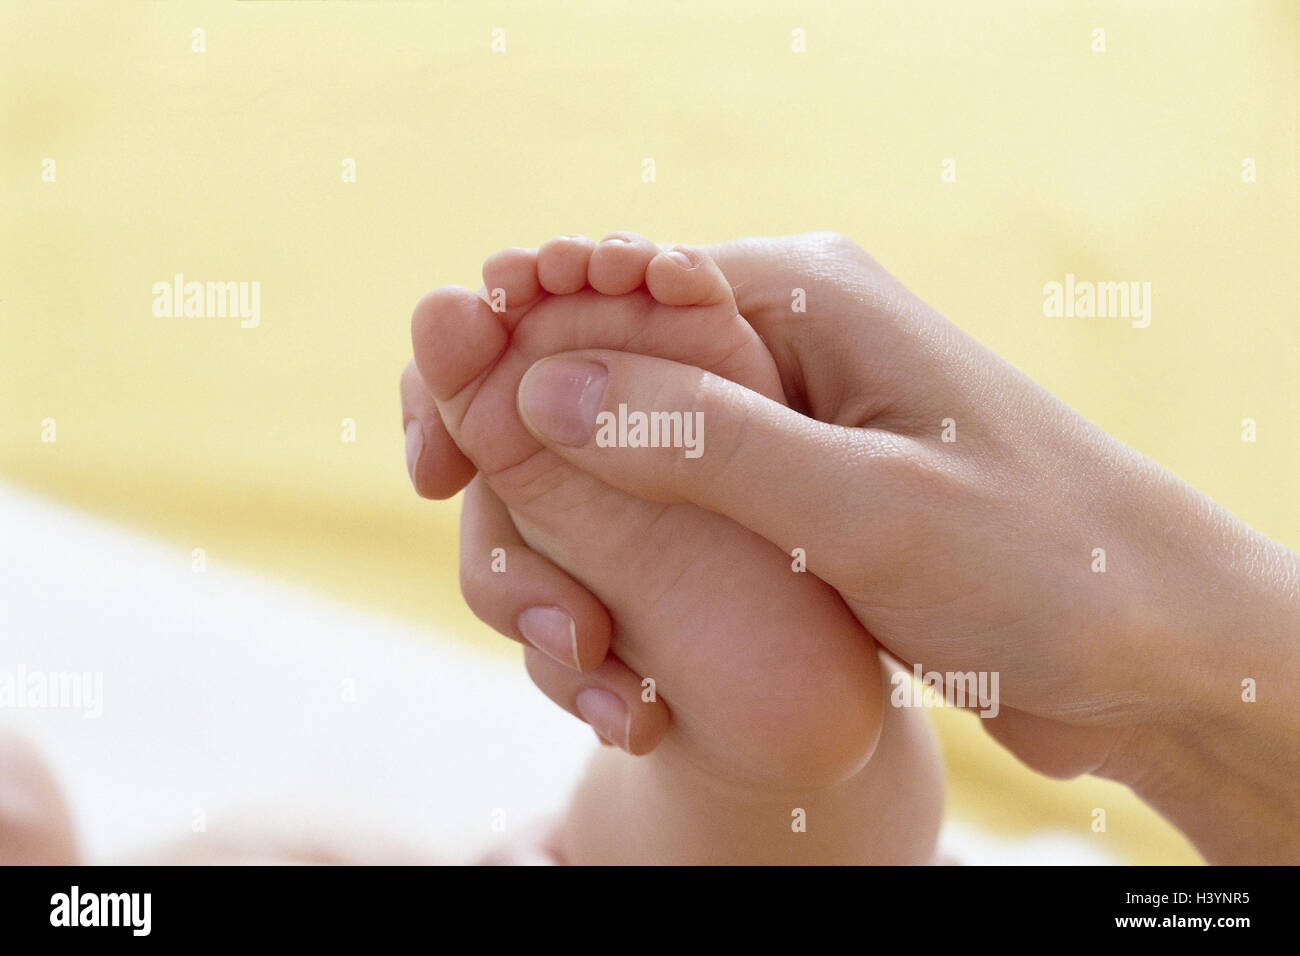 Women's hand, baby foot, massage, NOT EXCLUSIVELY!! hs woman, hand, infant, infant, foot, barefoot, hold, touch, touch, dear care, protection, care, massage, foot reflexes, check, affectionately, tenderness, very close Stock Photo